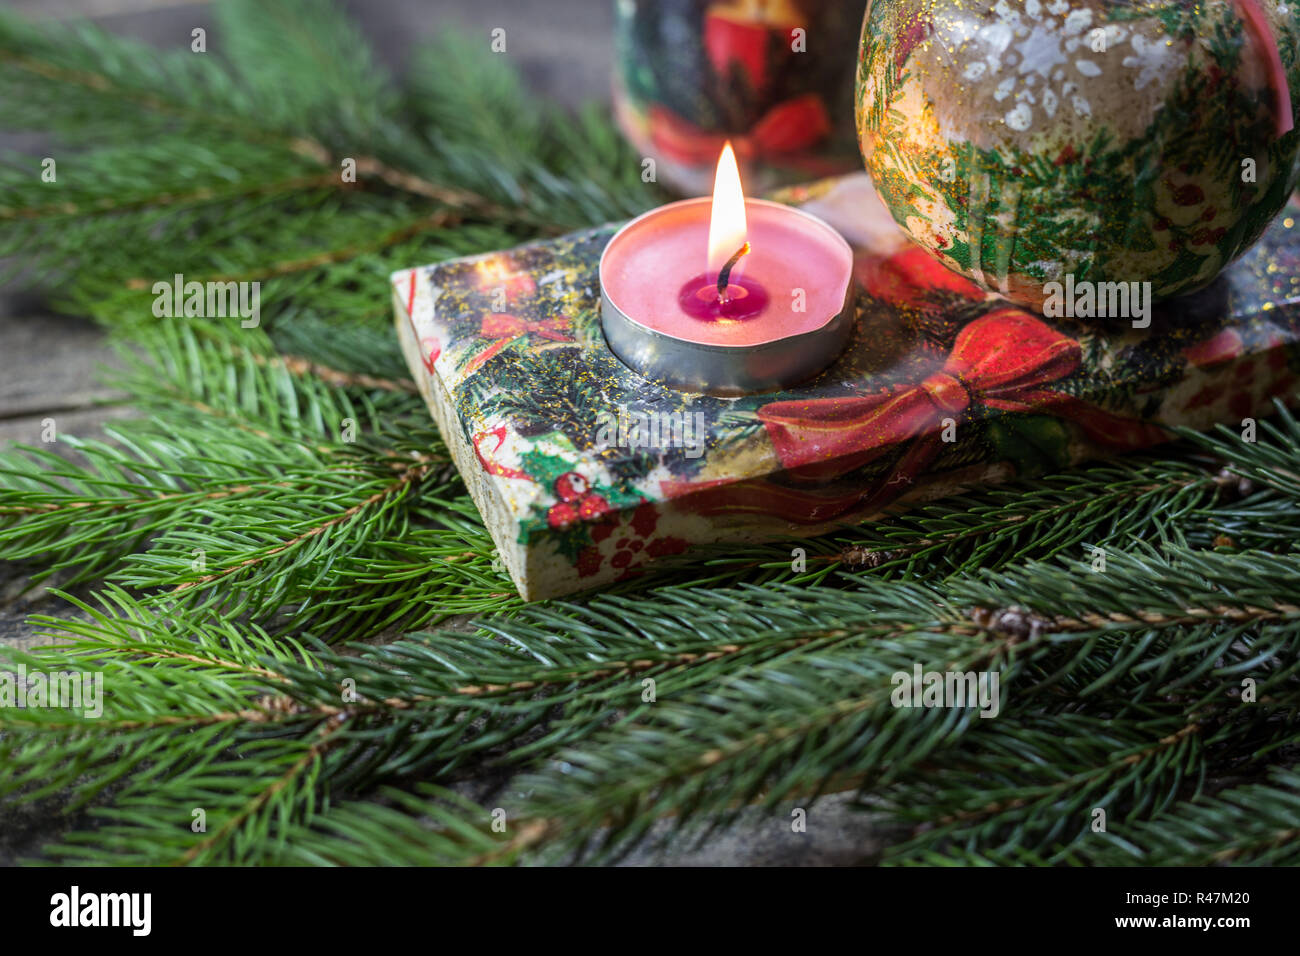 Candle holder decorated with decoupage technique with Christmas motifs and fir branches on a wooden background. Concept of traditional Christmas celeb Stock Photo